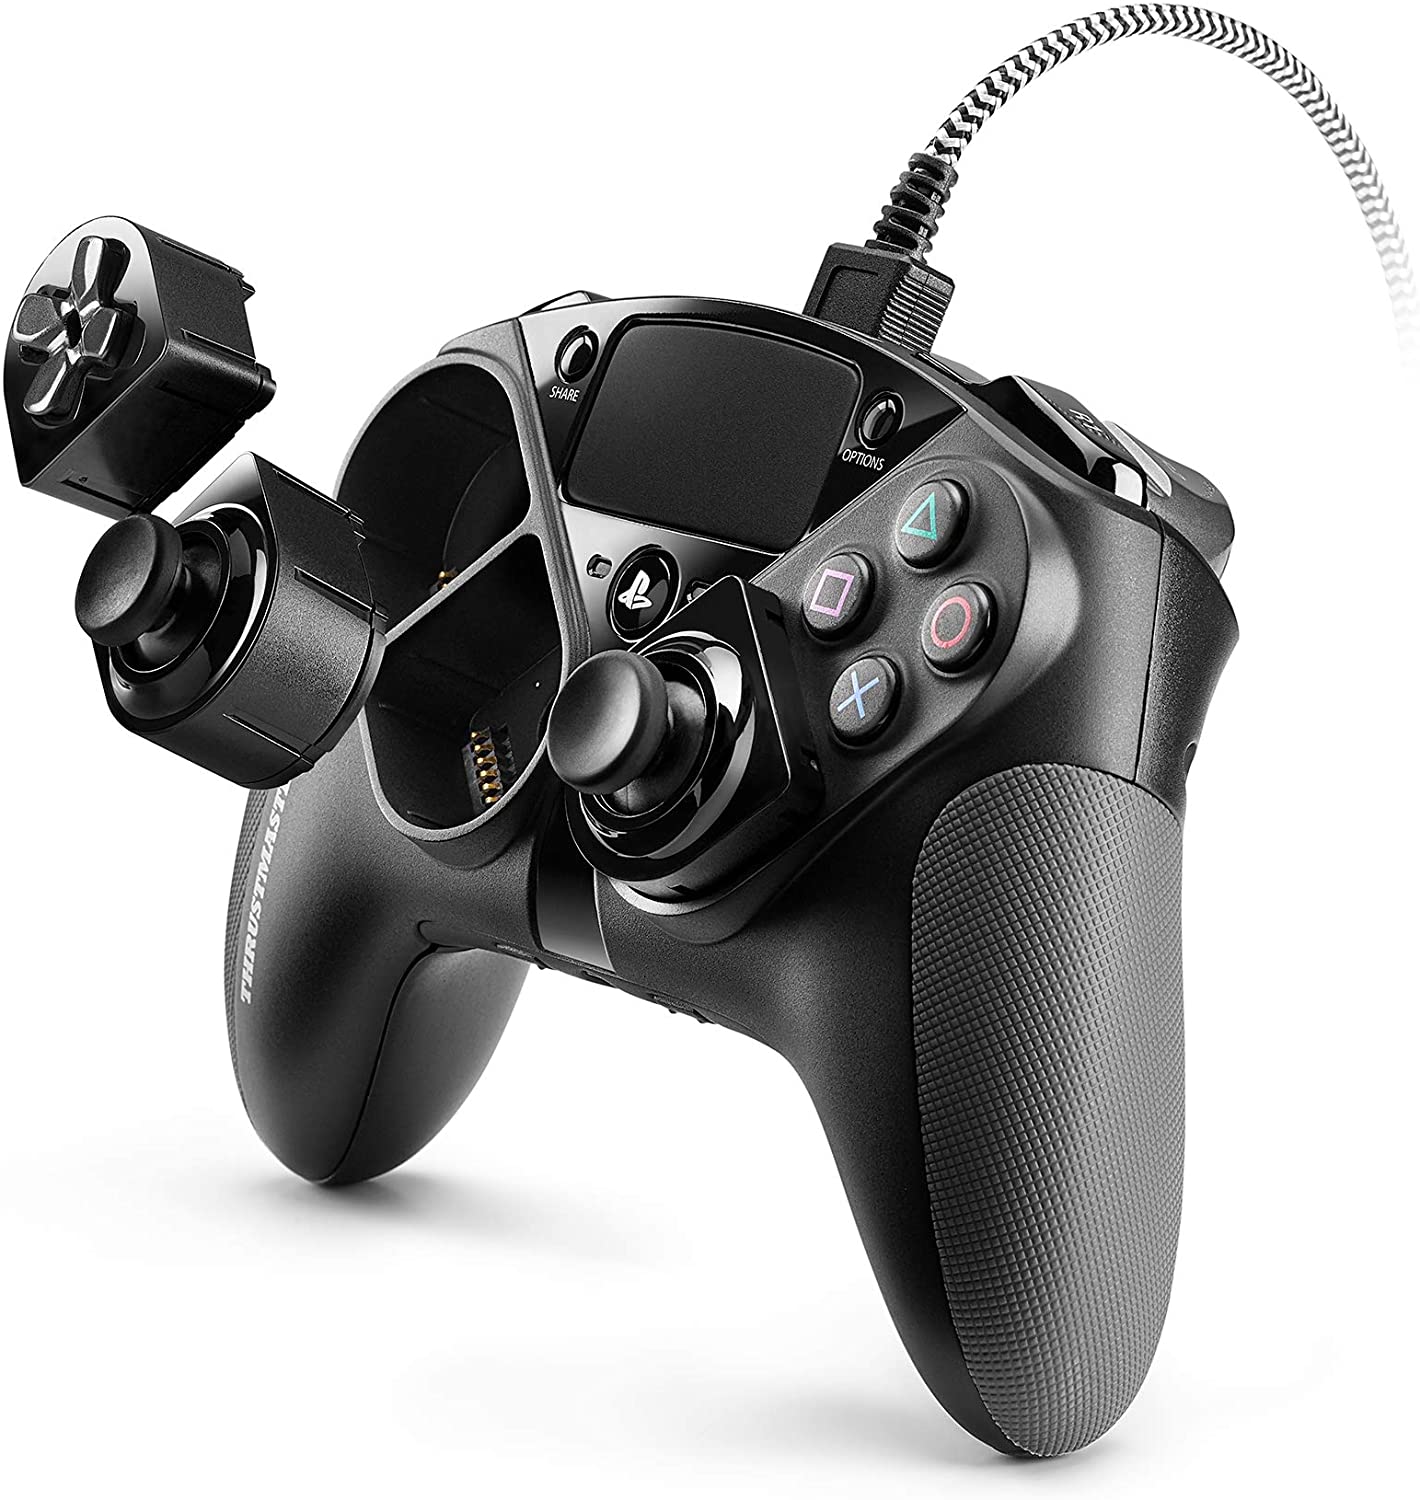 Thrustmaster Eswap Pro X Controller Review